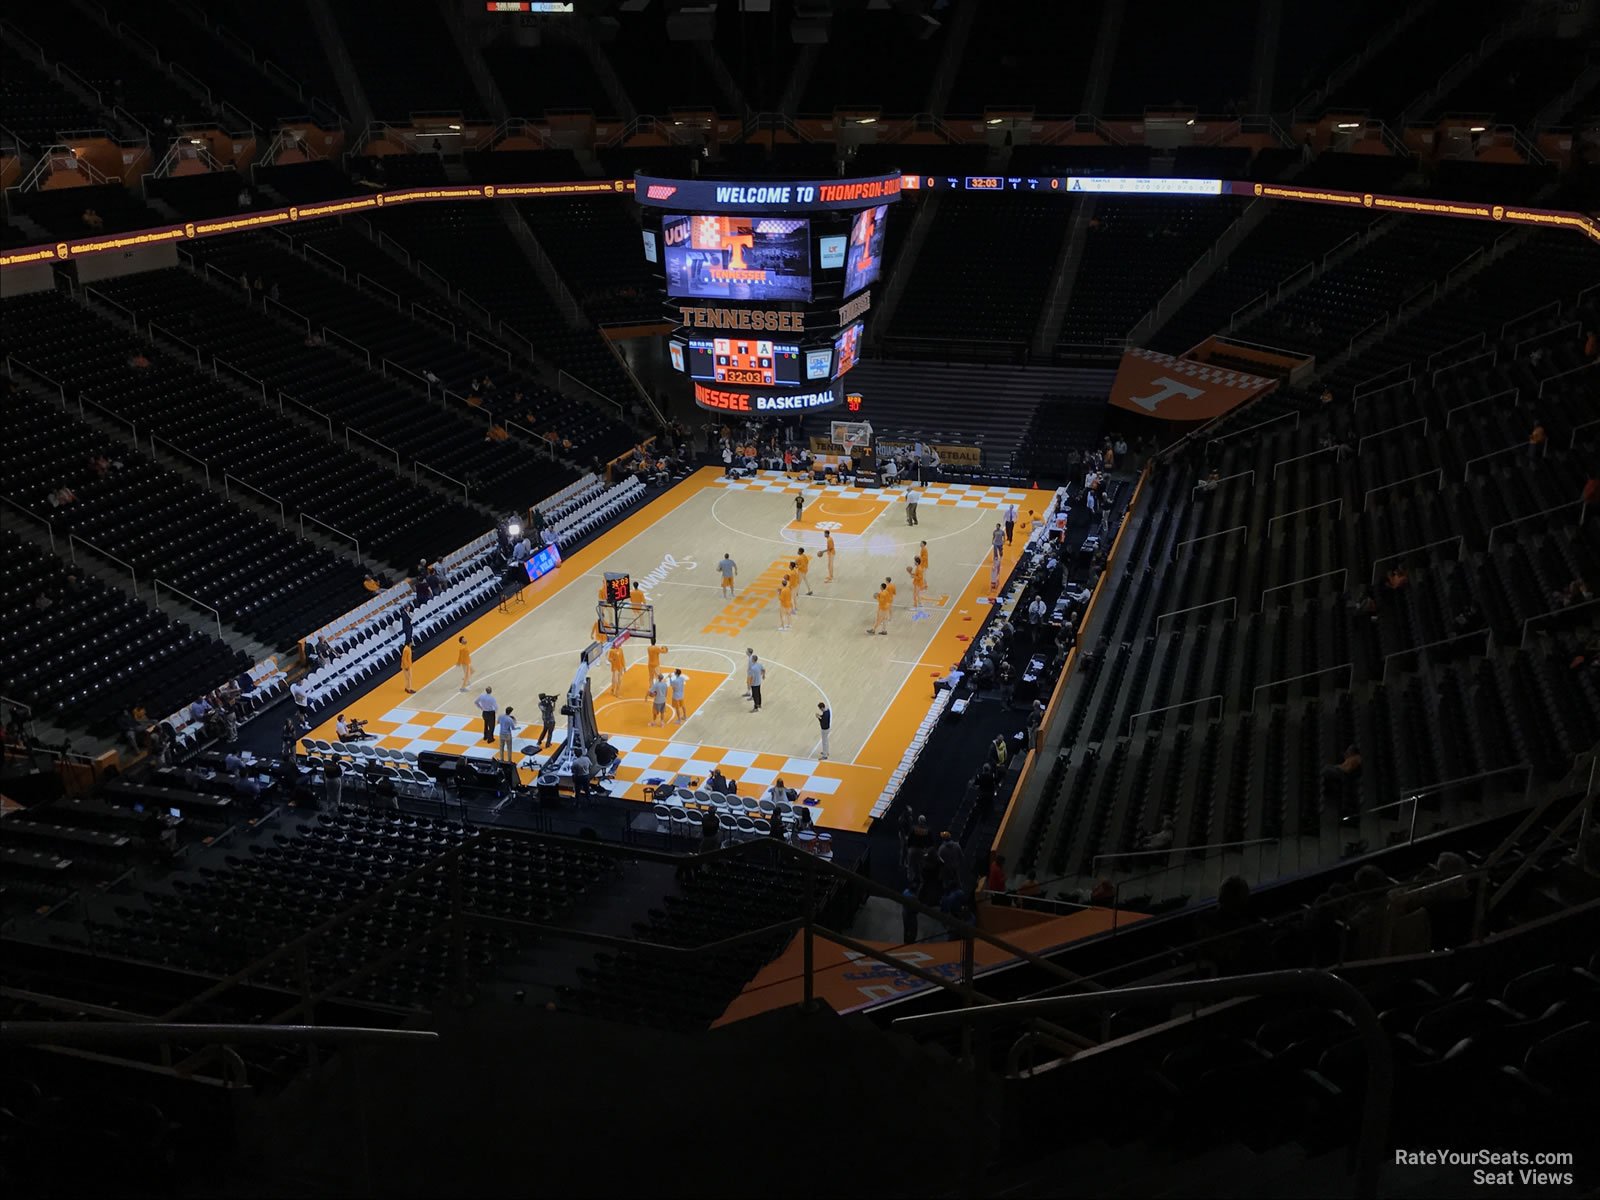 section 311a, row 7 seat view  - thompson-boling arena